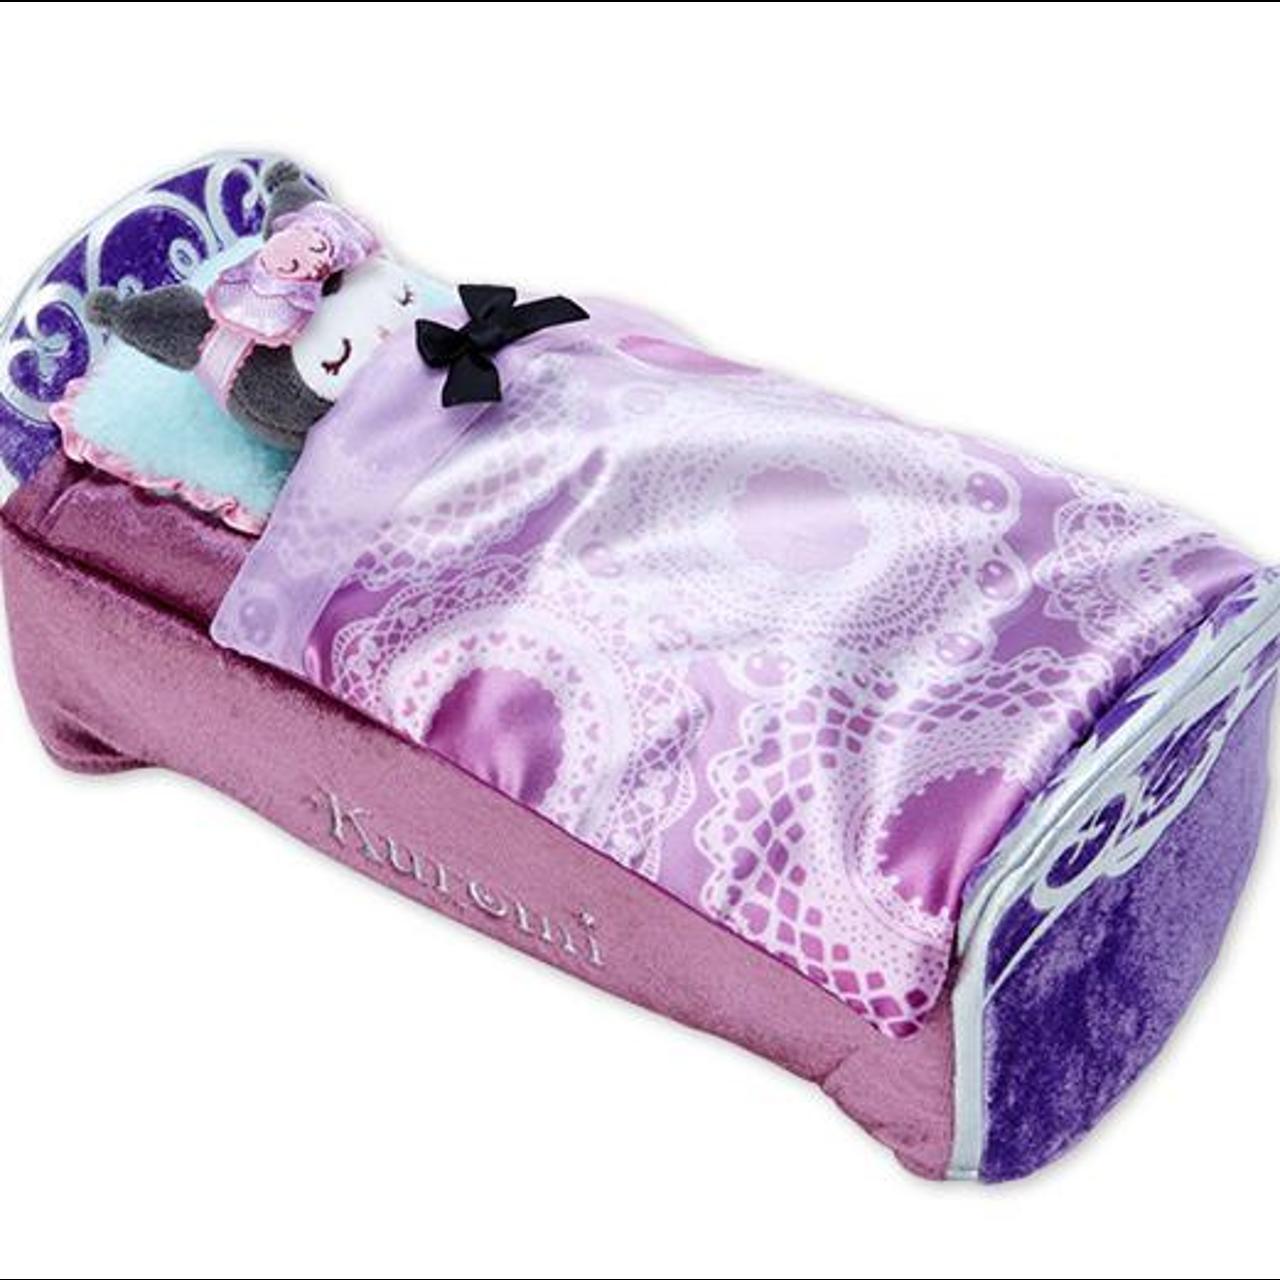 Product Image 1 - Kuromi Tissue Cover
Limited edition
Imported from